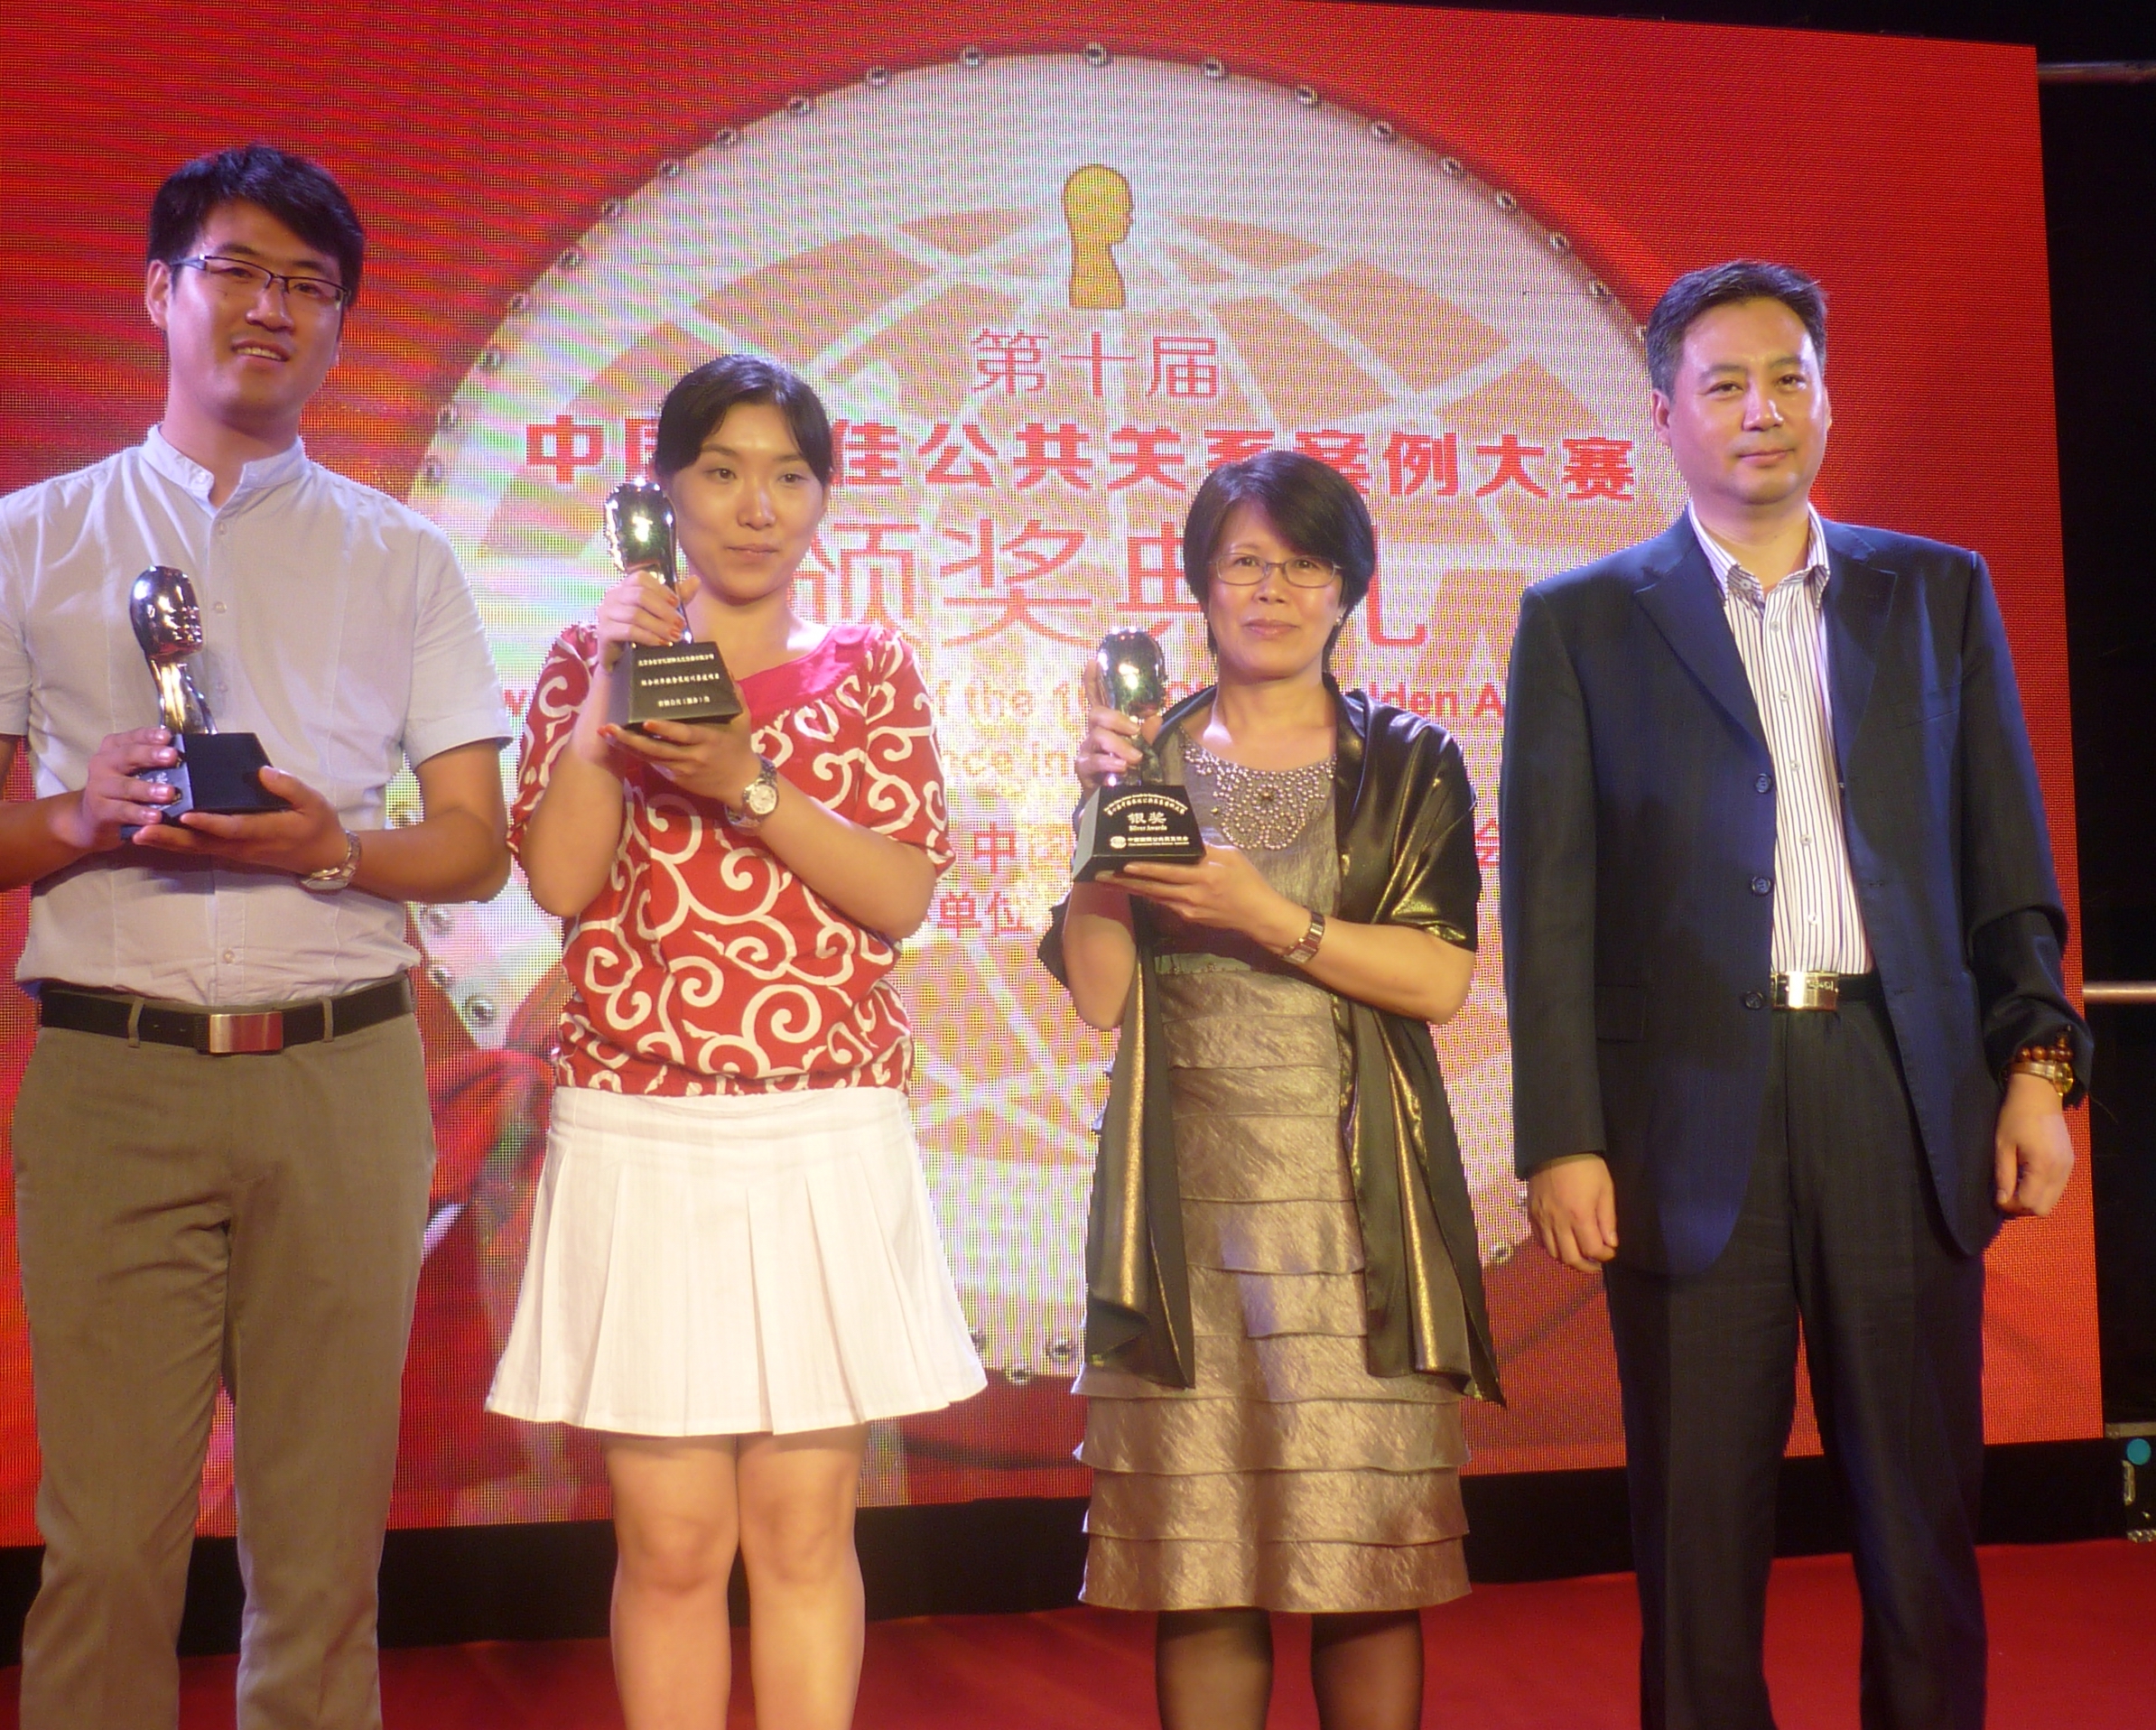 NWS Holdings wins Silver Award from China International Public Relations Association